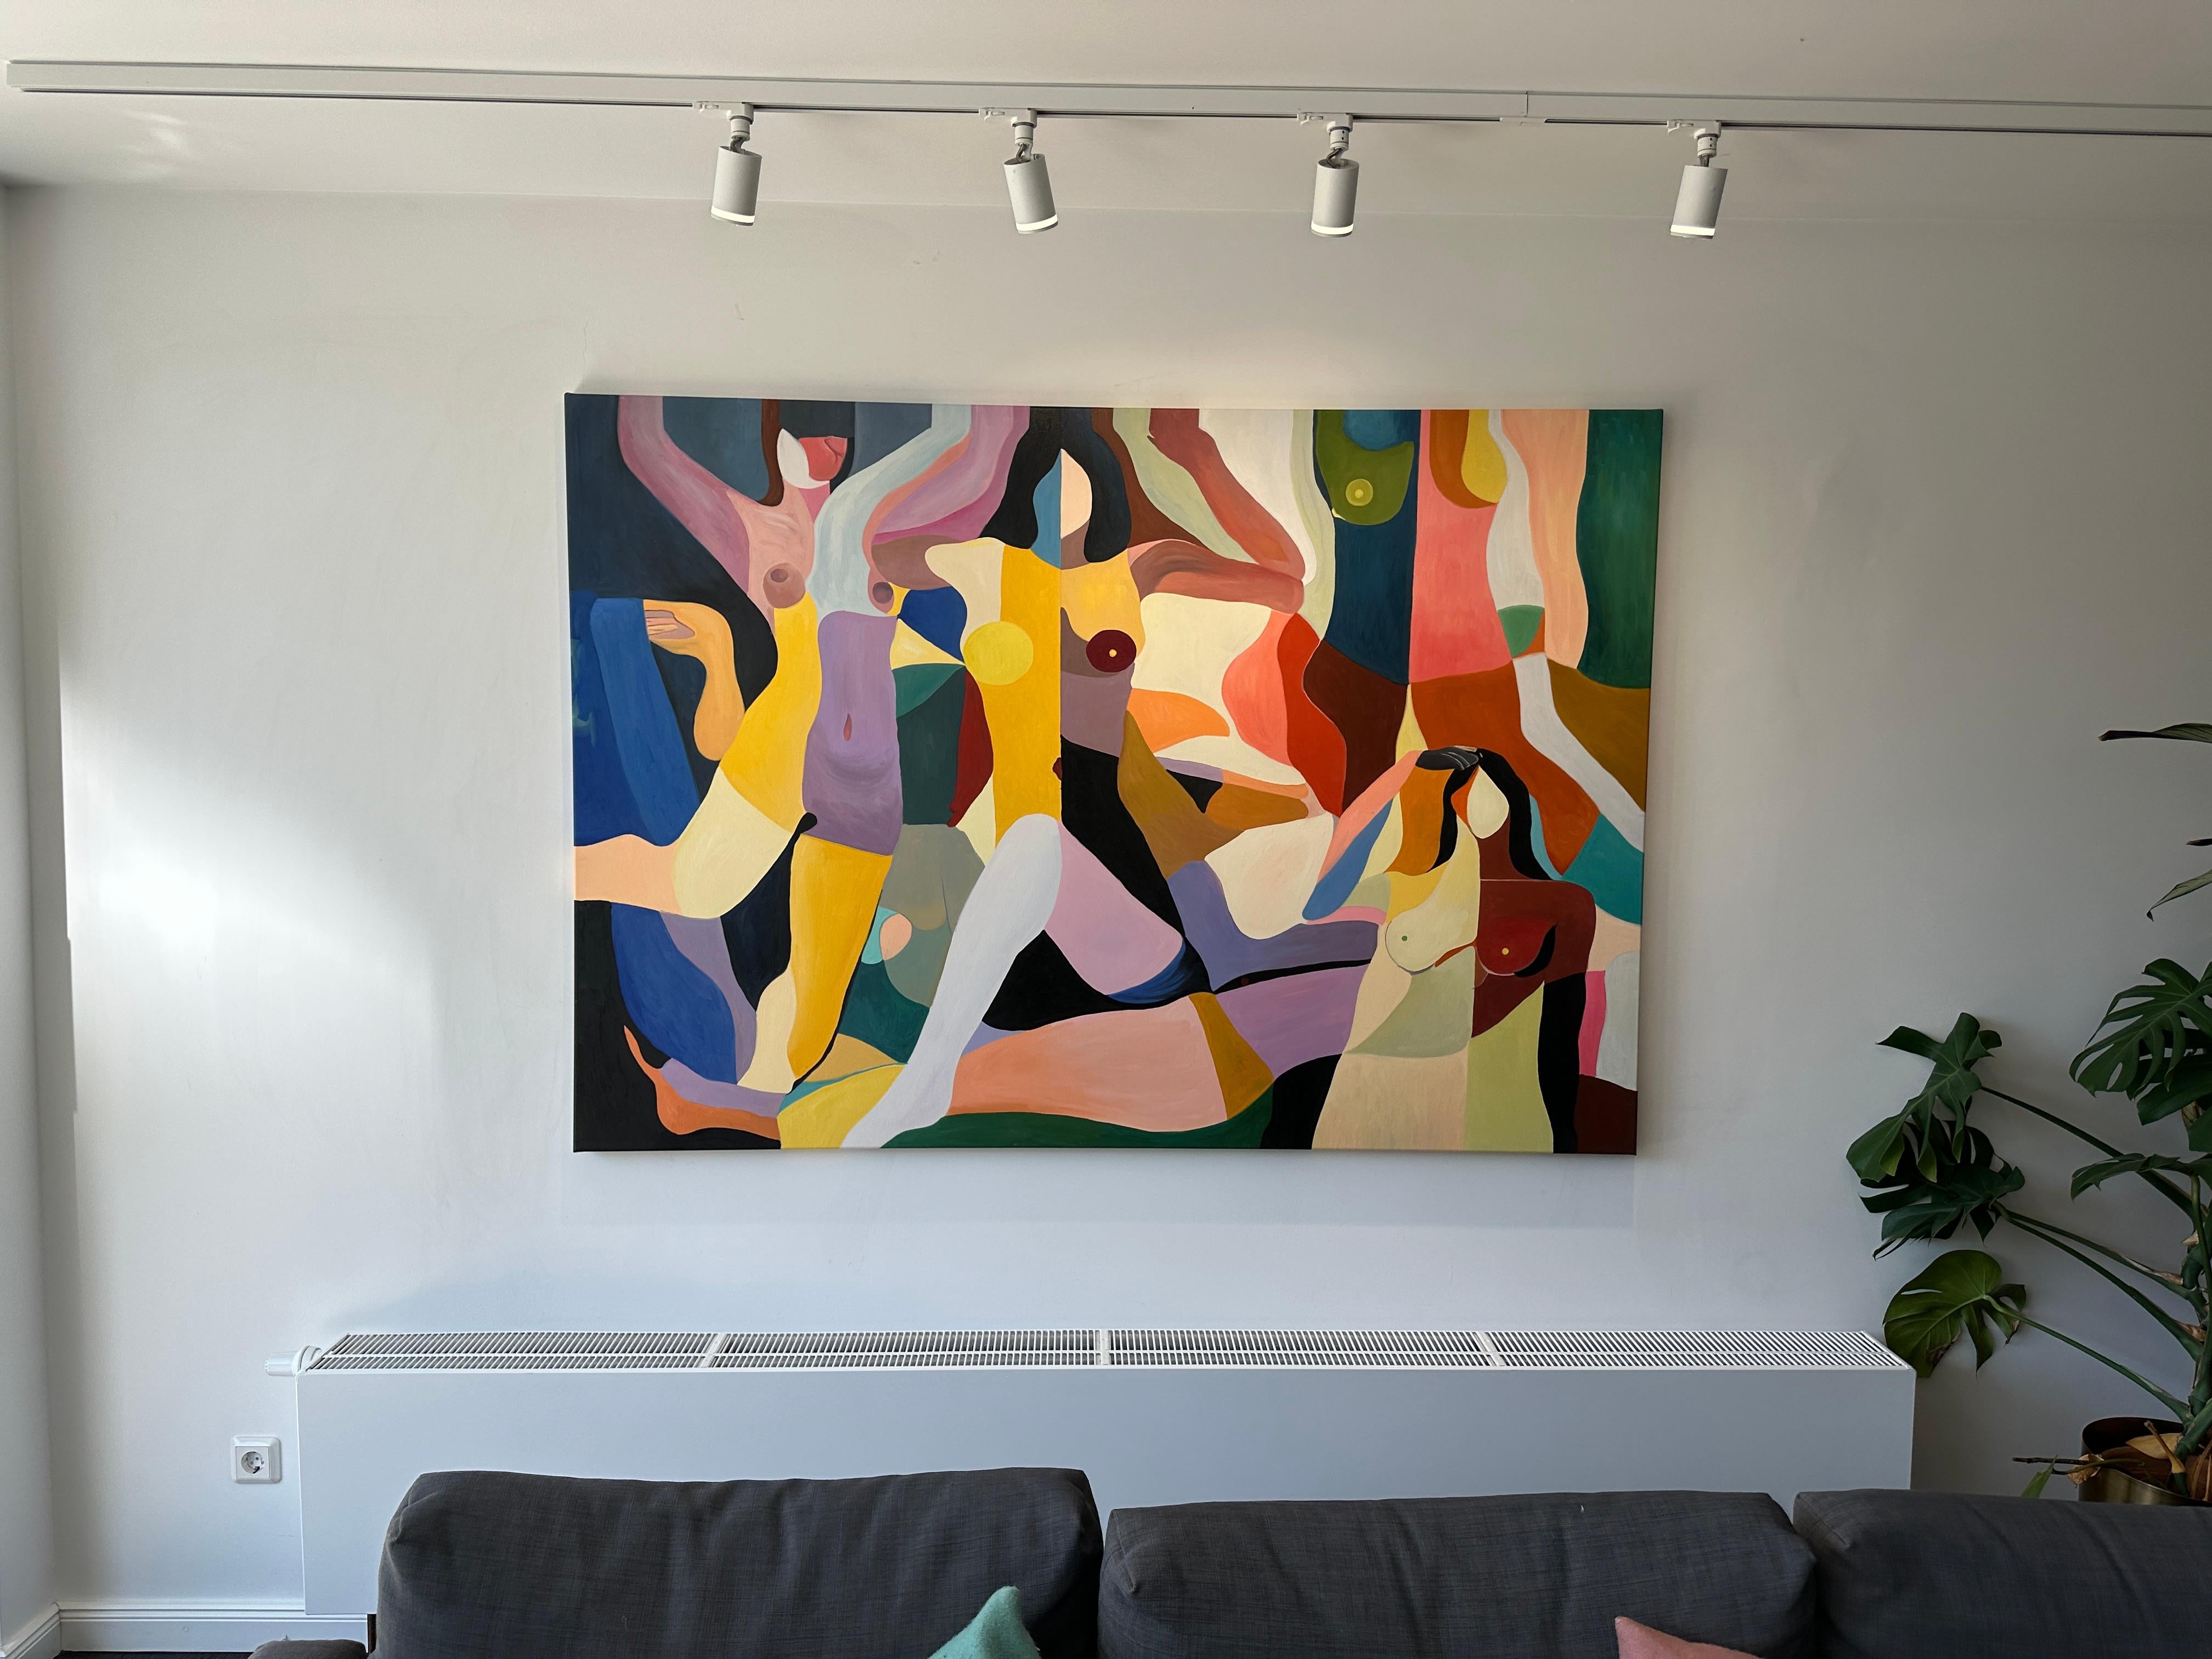 In general, her paintings are joyful geometric abstractions of the female bodies, with color parcels interacting or overlapping. Her figures are at ease with their bodies and are unique and vibrant. 
Hormel is inspired by Picasso’s figurative